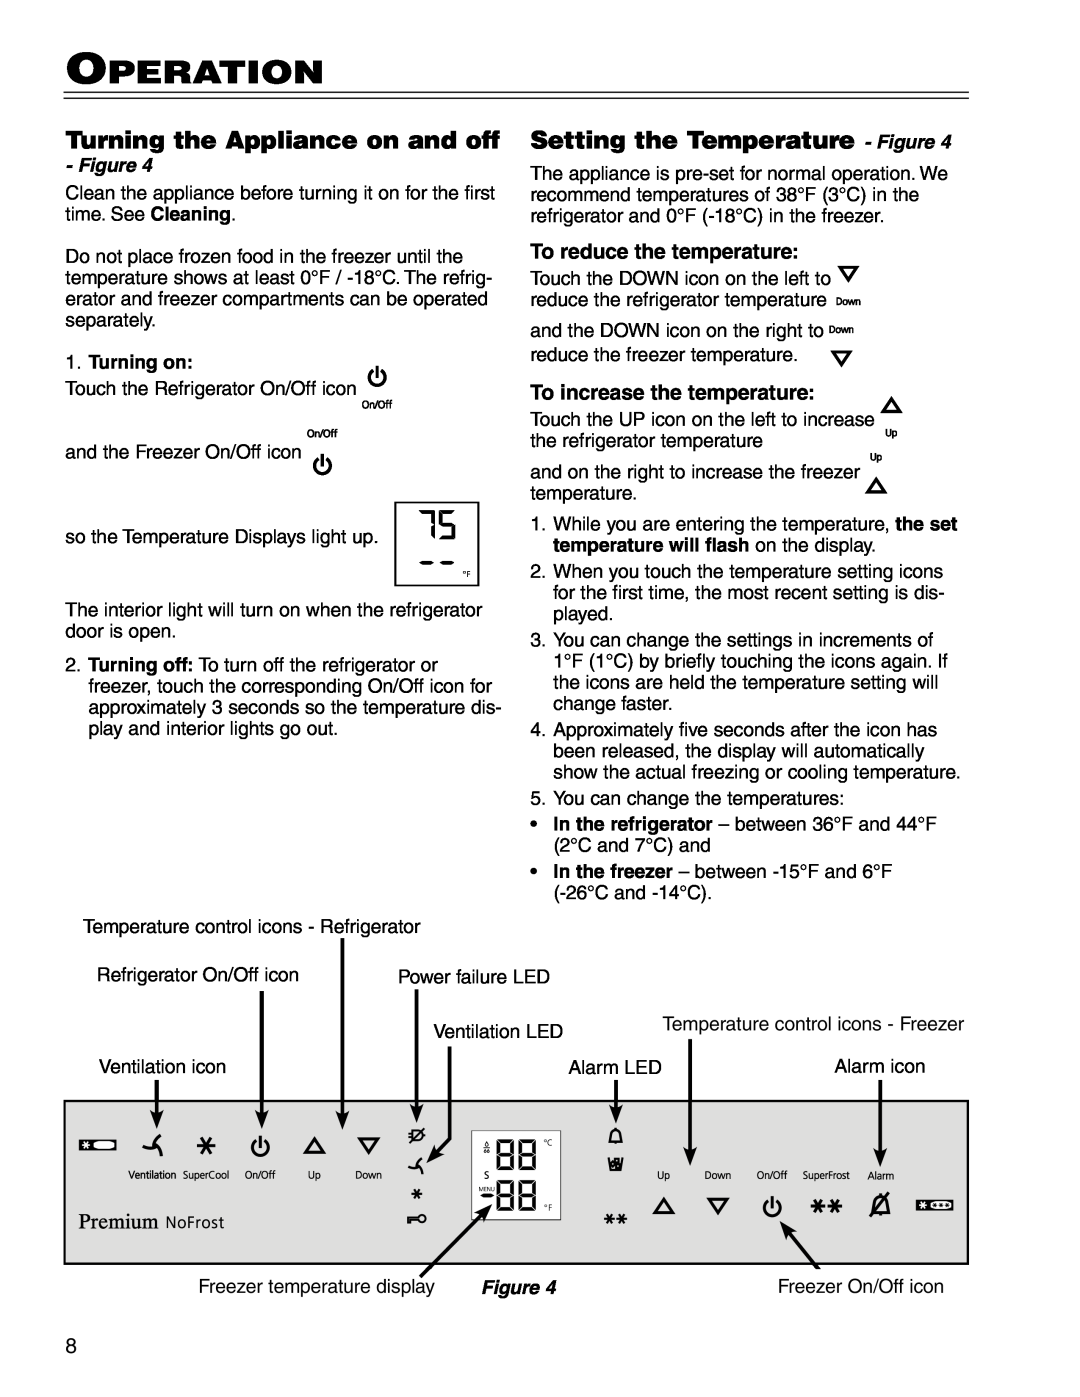 Liebherr CS 1611 7801 149-00 manual Operation, Turning the Appliance on and off, Setting the Temperature - Figure 